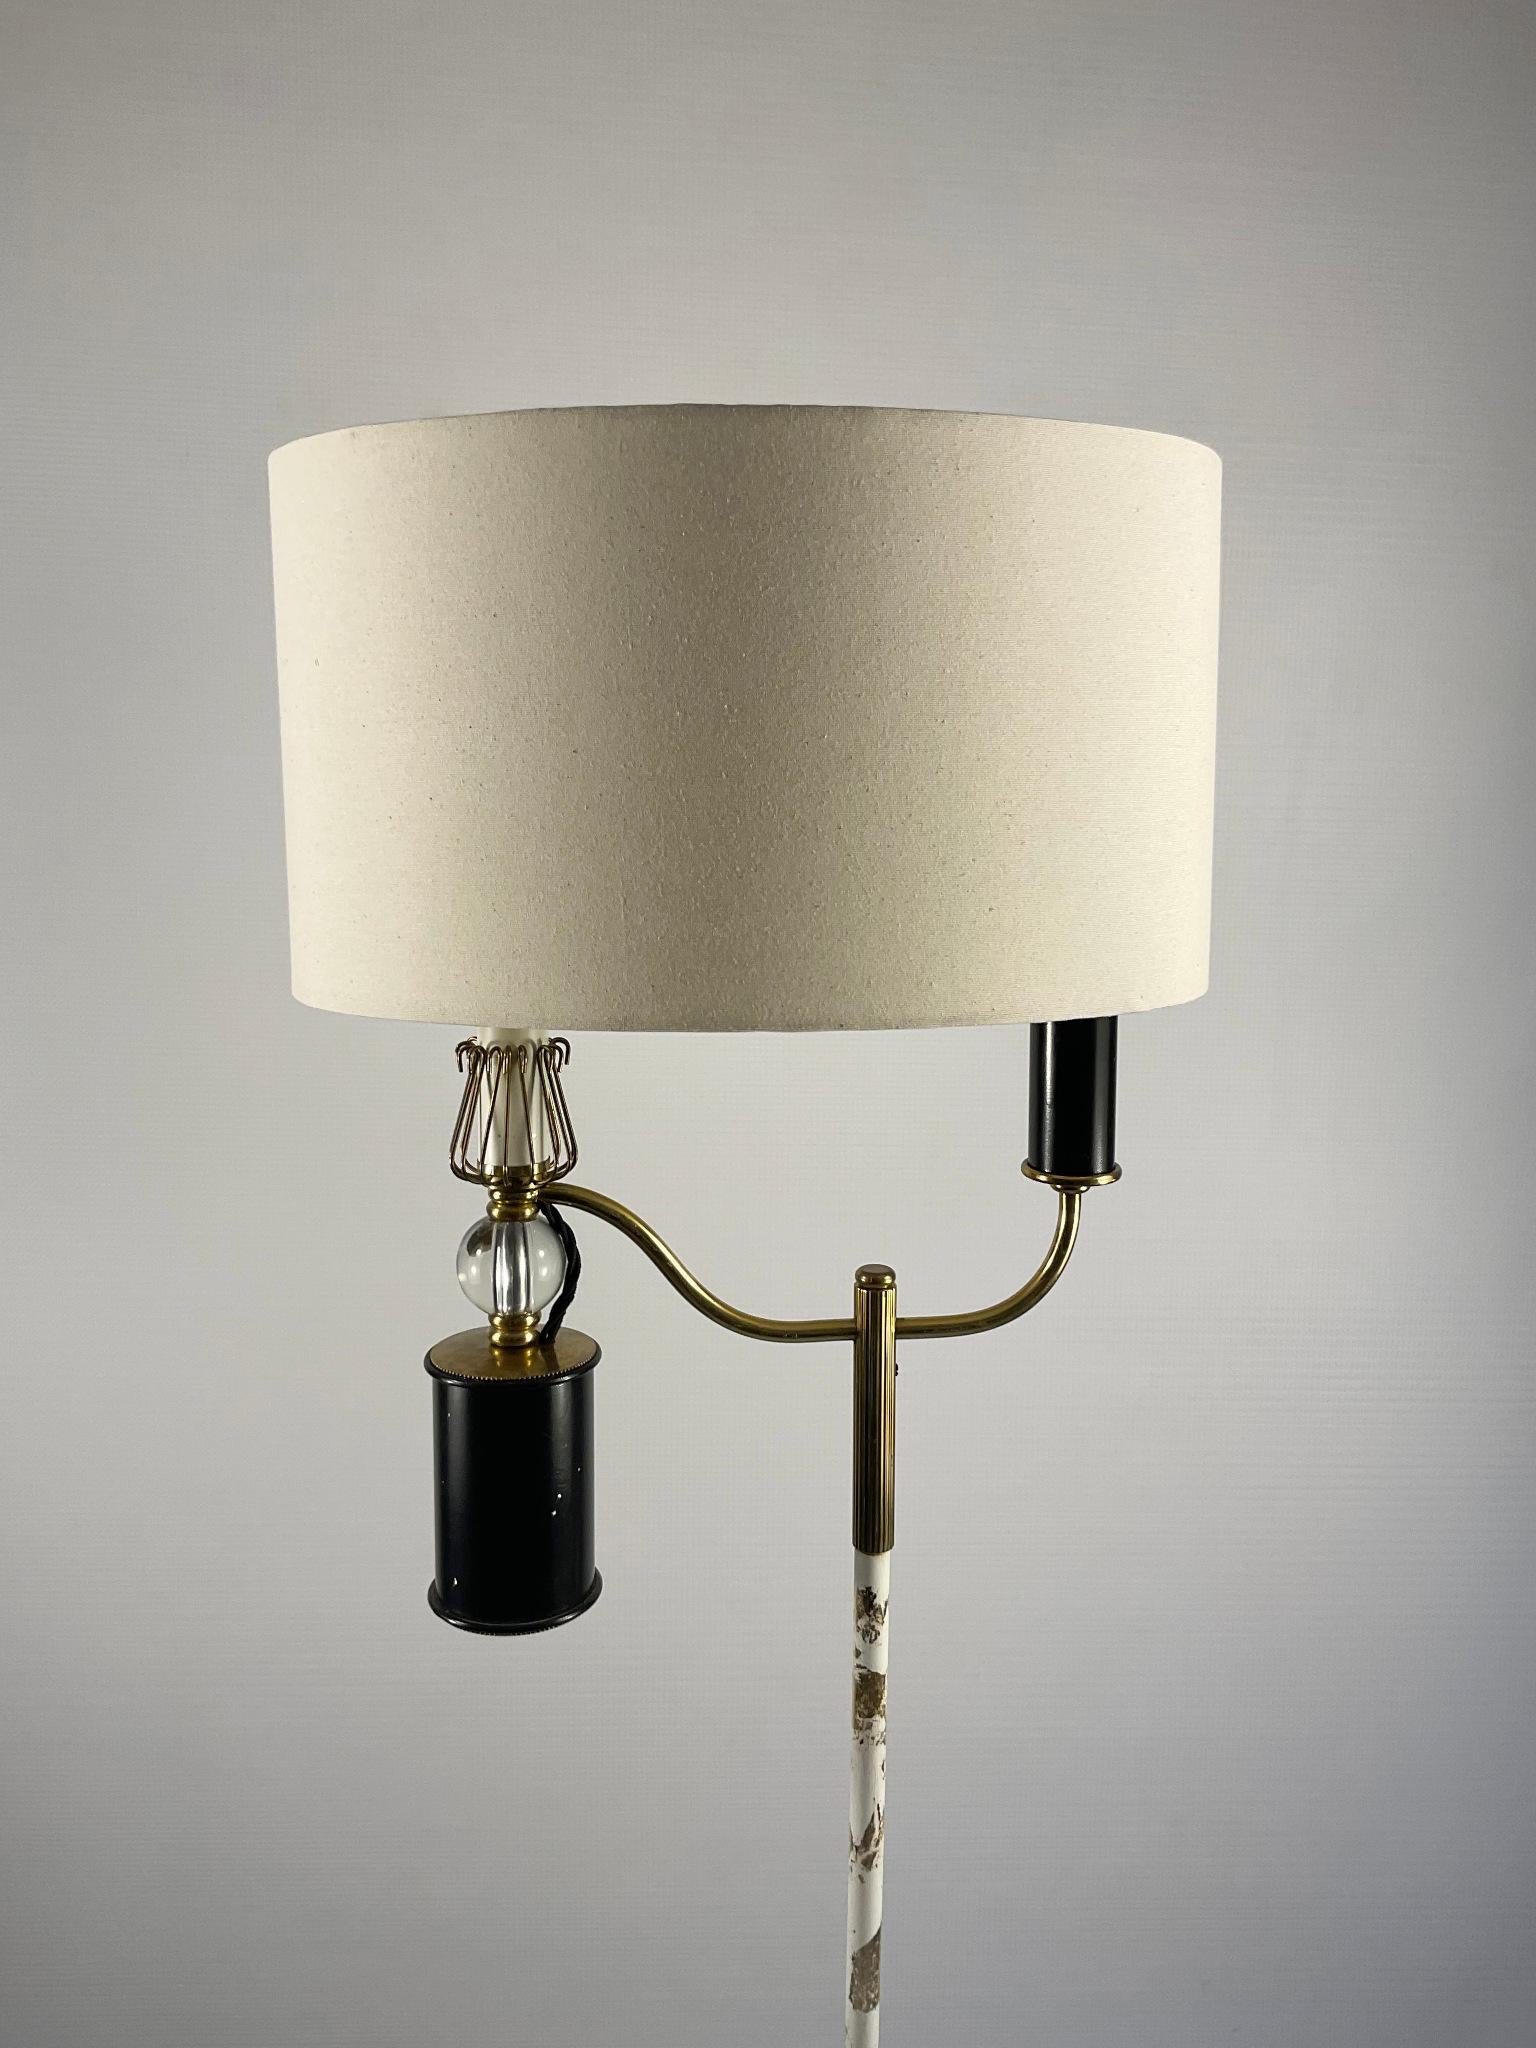 1950s Floor Lamp Attributed to Maison Lunel France For Sale 5